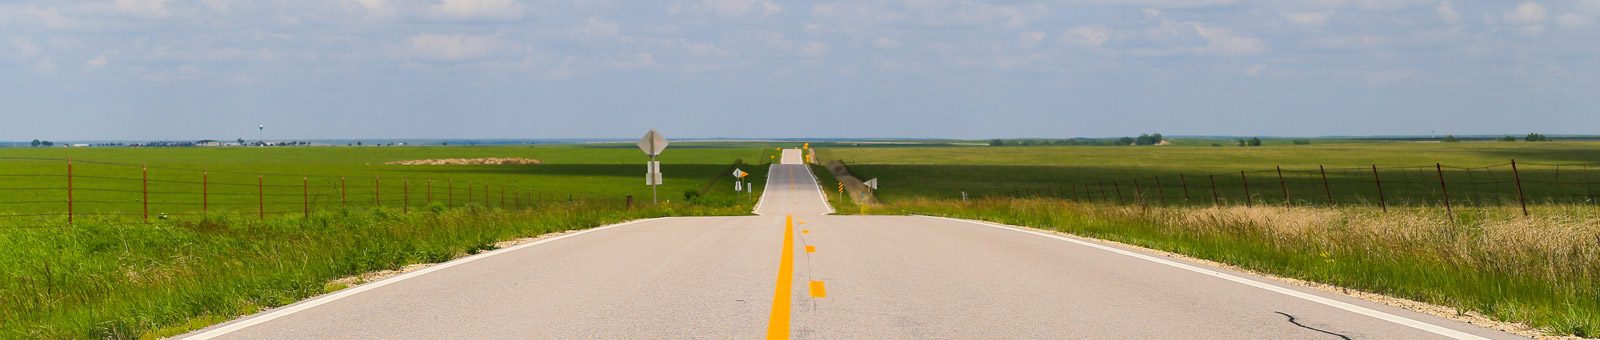 Pictured: Kansas road in the plains with green grass.